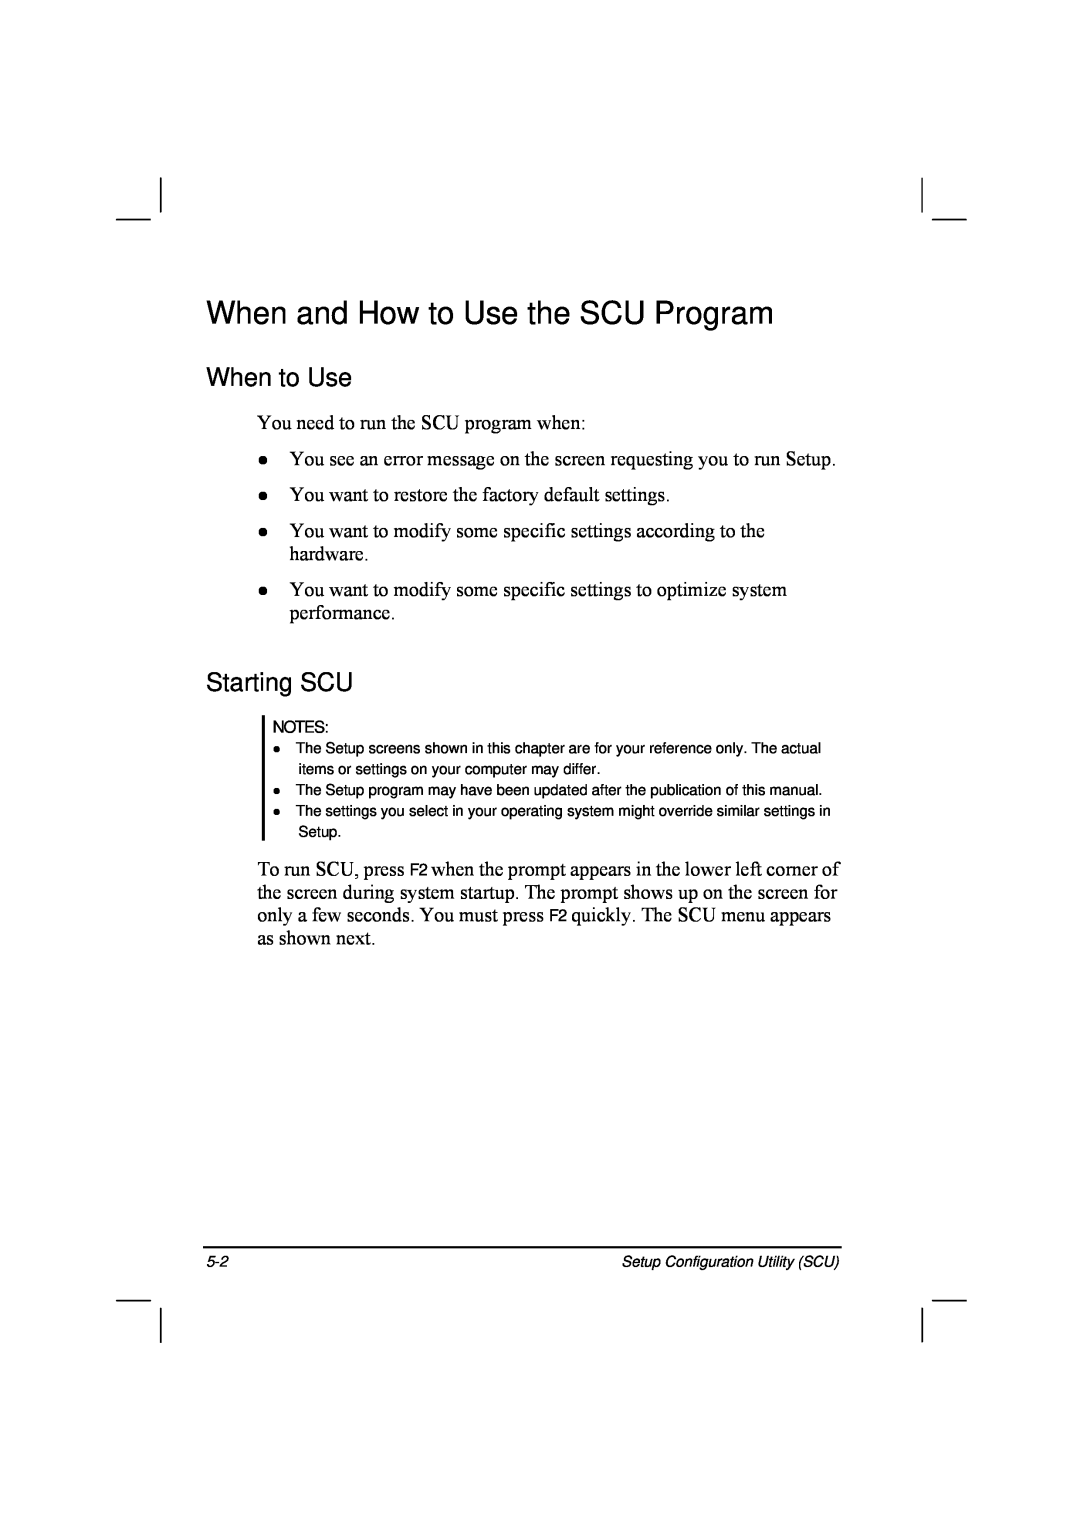 TAG 20 Series manual When and How to Use the SCU Program, When to Use, Starting SCU 